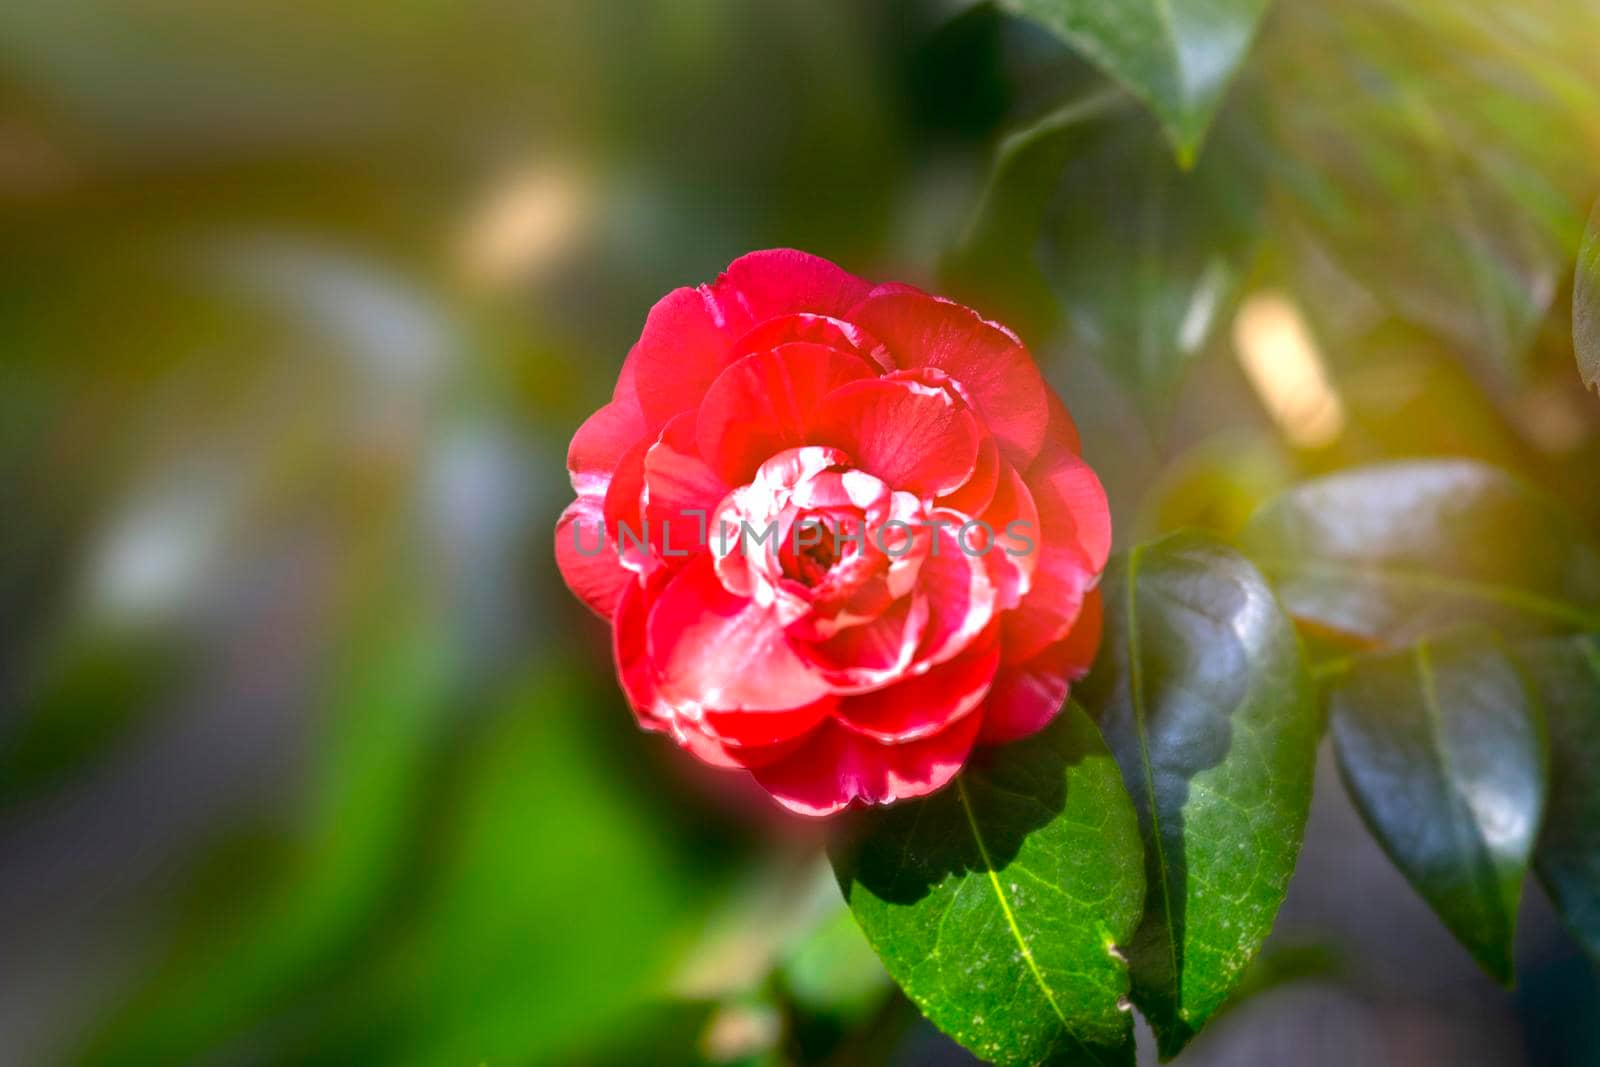 Red camellia flower on a blurry green background.